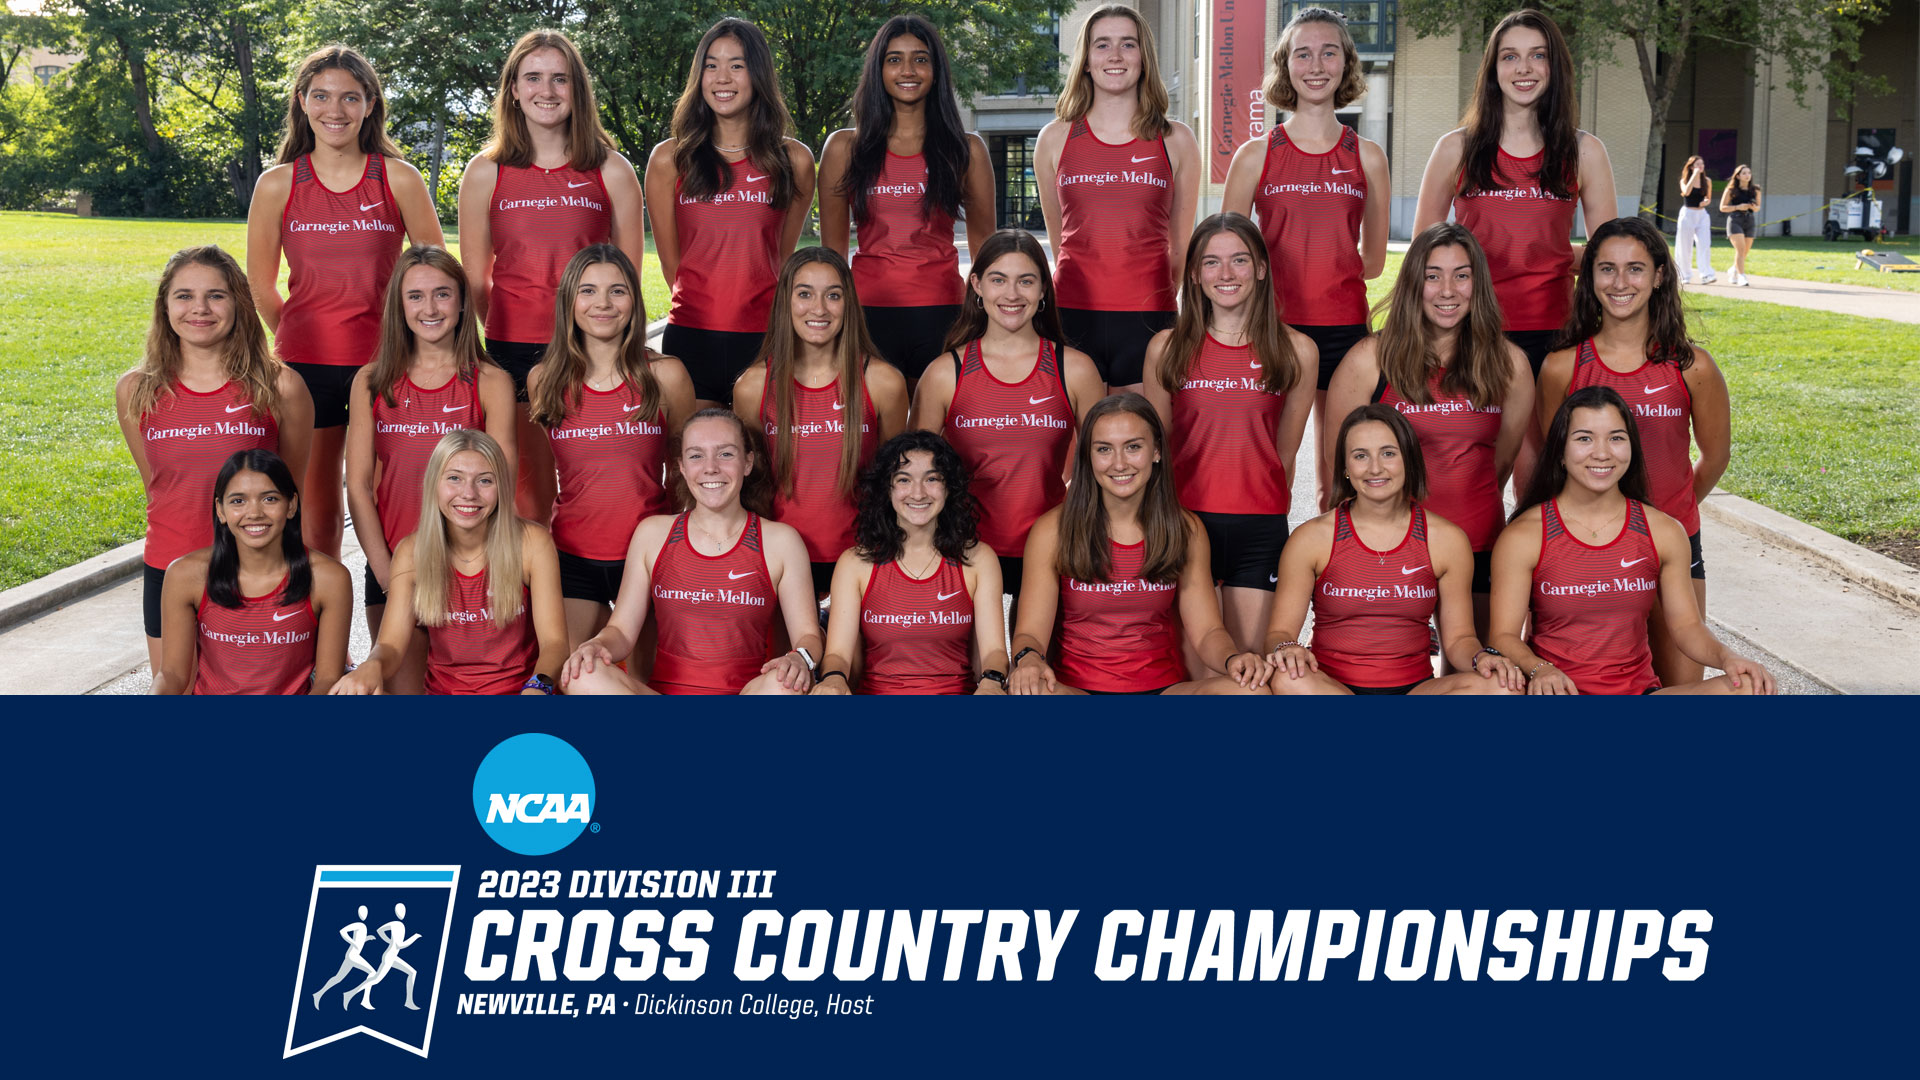 team photo of women's cross country team wearing red jersey tops with NCAA logo reading 2023 Division III Cross Country Championships